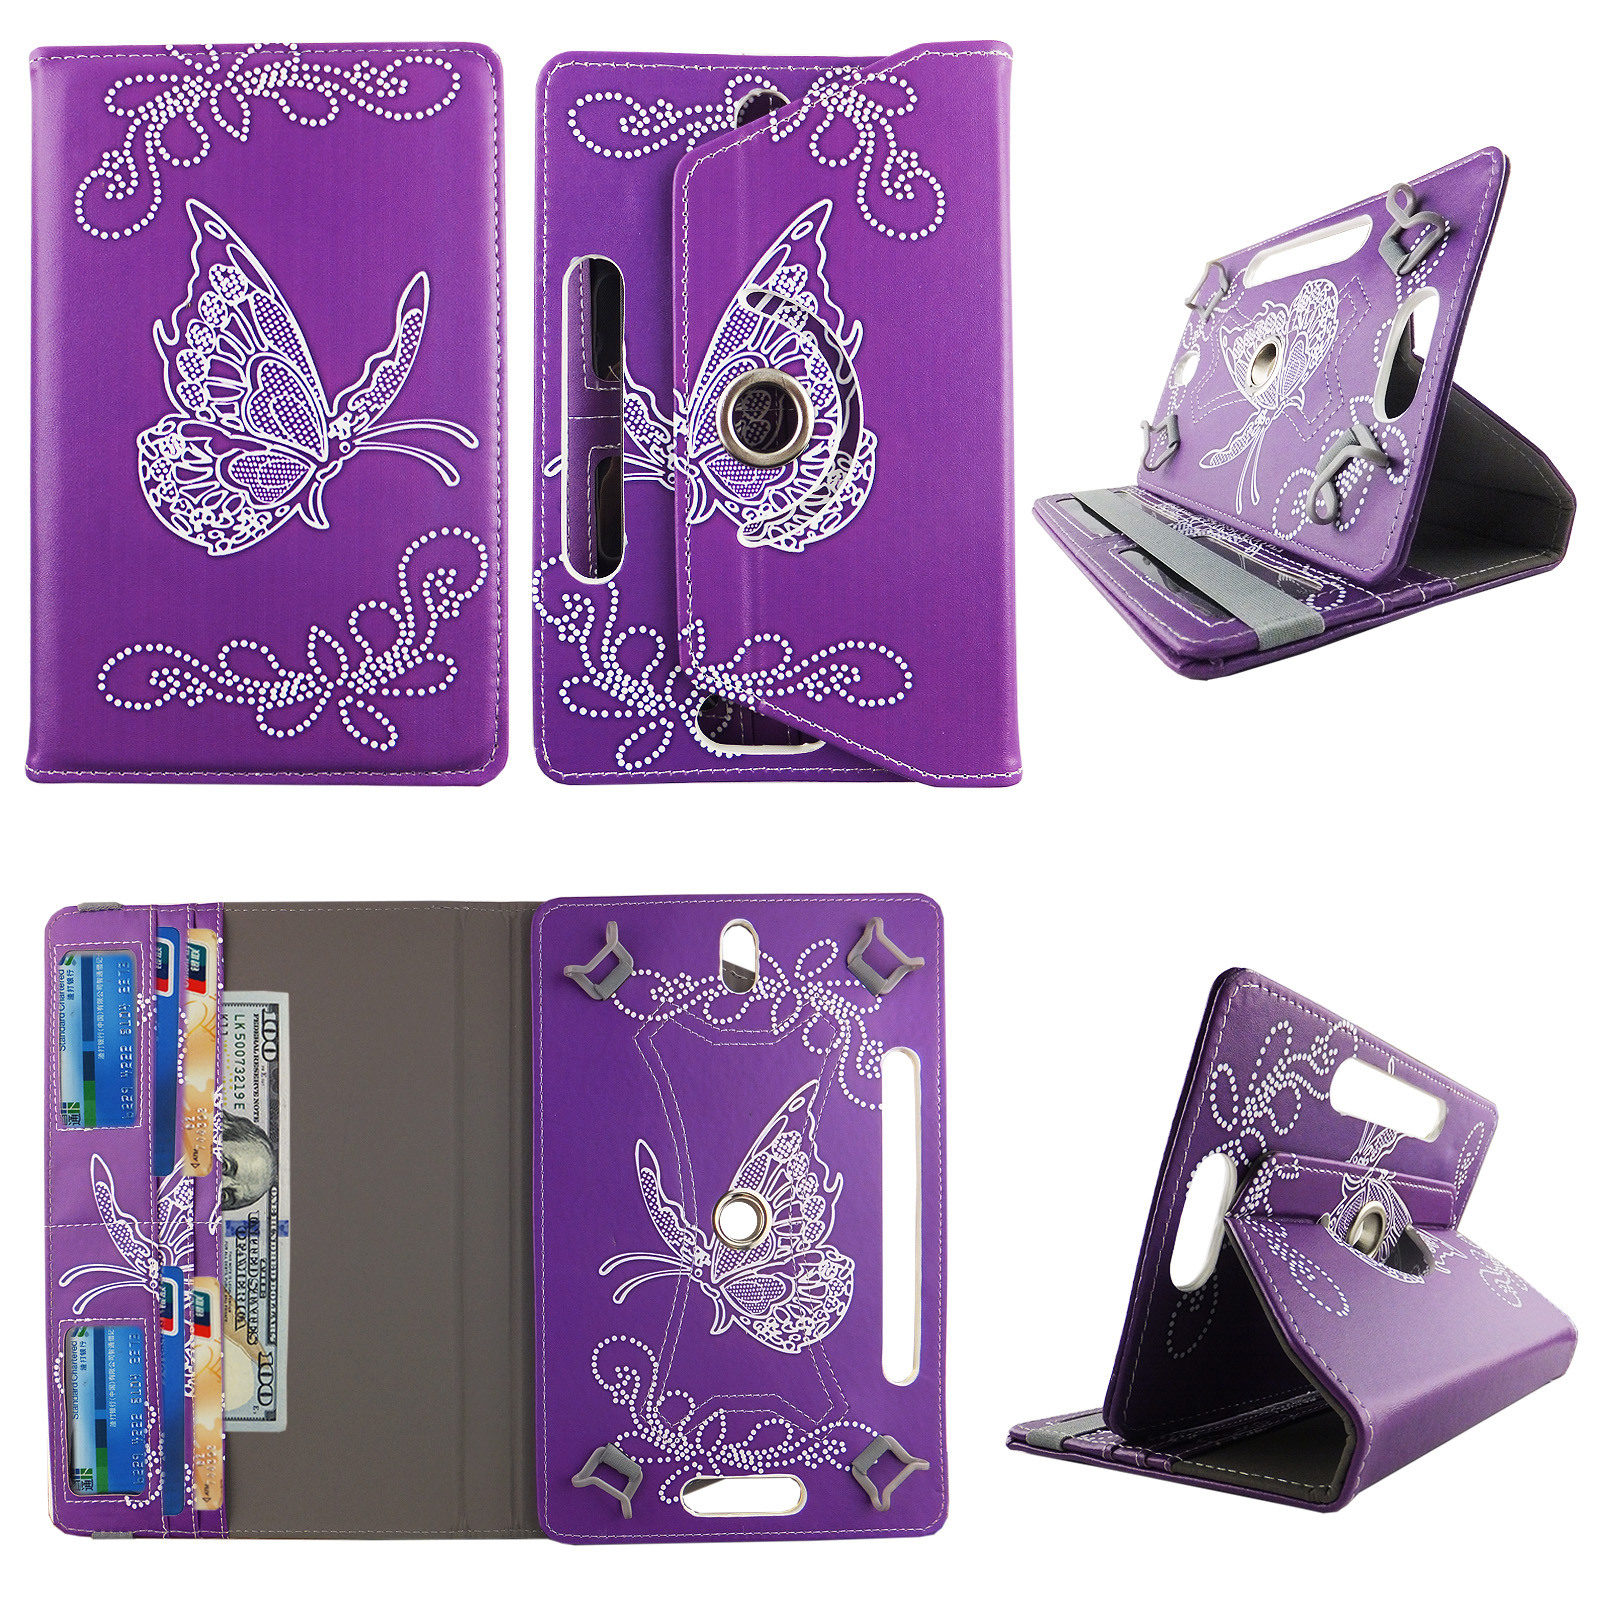 Butterfly Purple tablet case 10 inch for Visual Land Prestige 10" 10inch android tablet cases 360 rotating slim folio stand protector pu leather cover travel e-reader cash slots - image 1 of 2